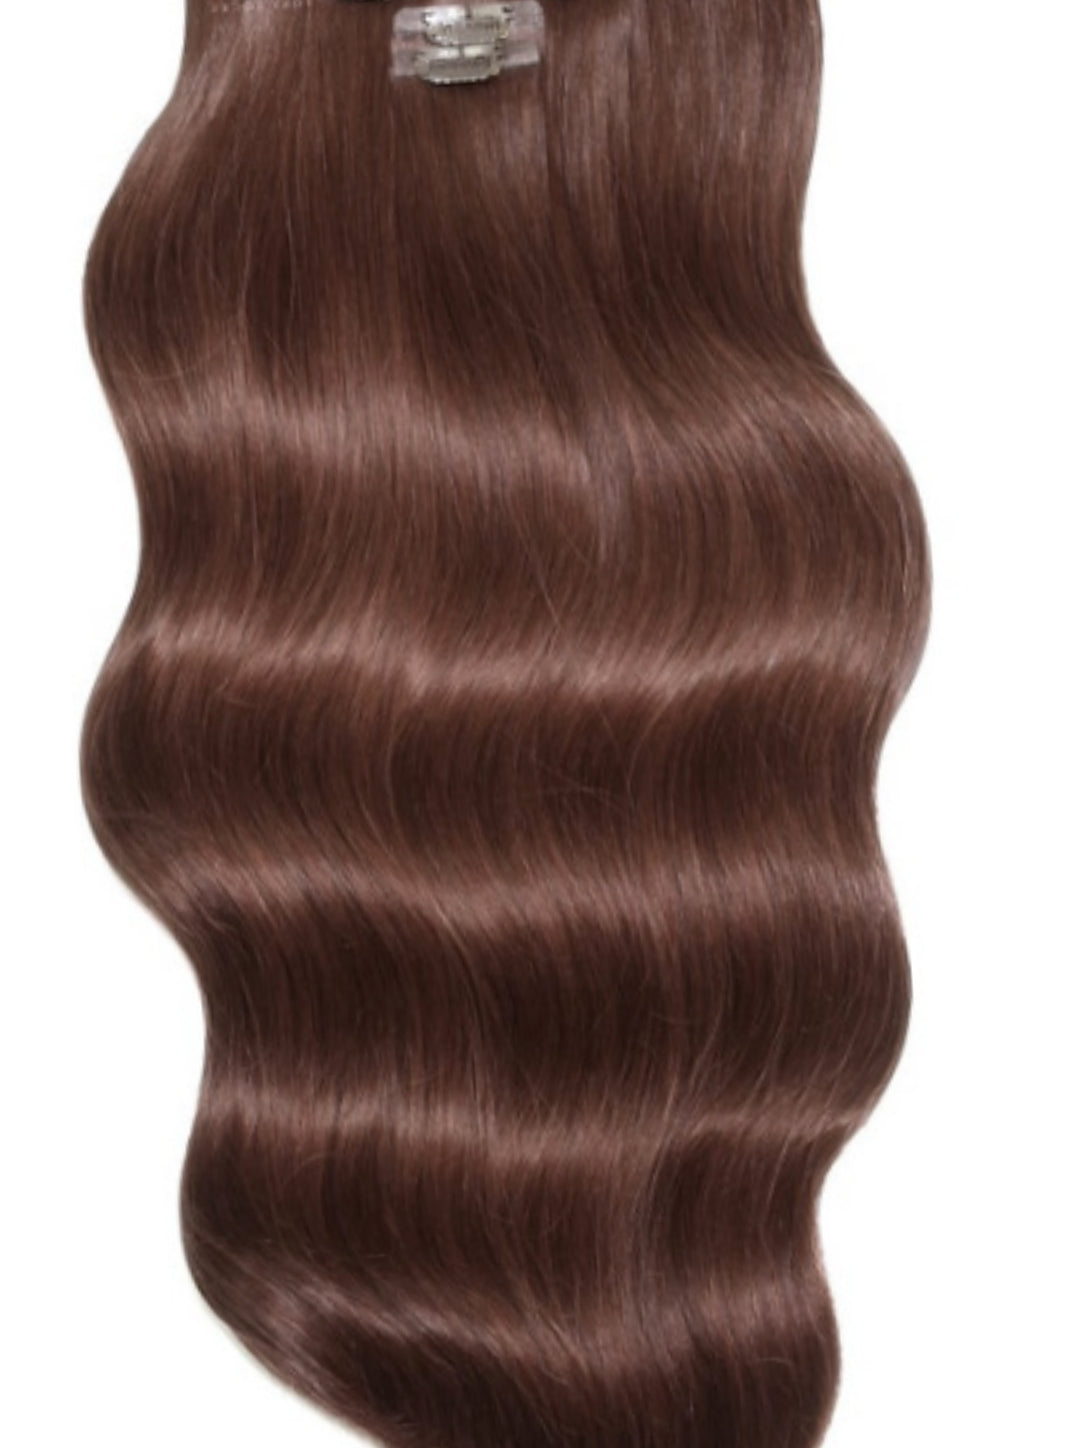 #8 CHESTNUT BROWN CLIP IN HAIR EXTENSIONS EXTRA THICK 150 GRAMS